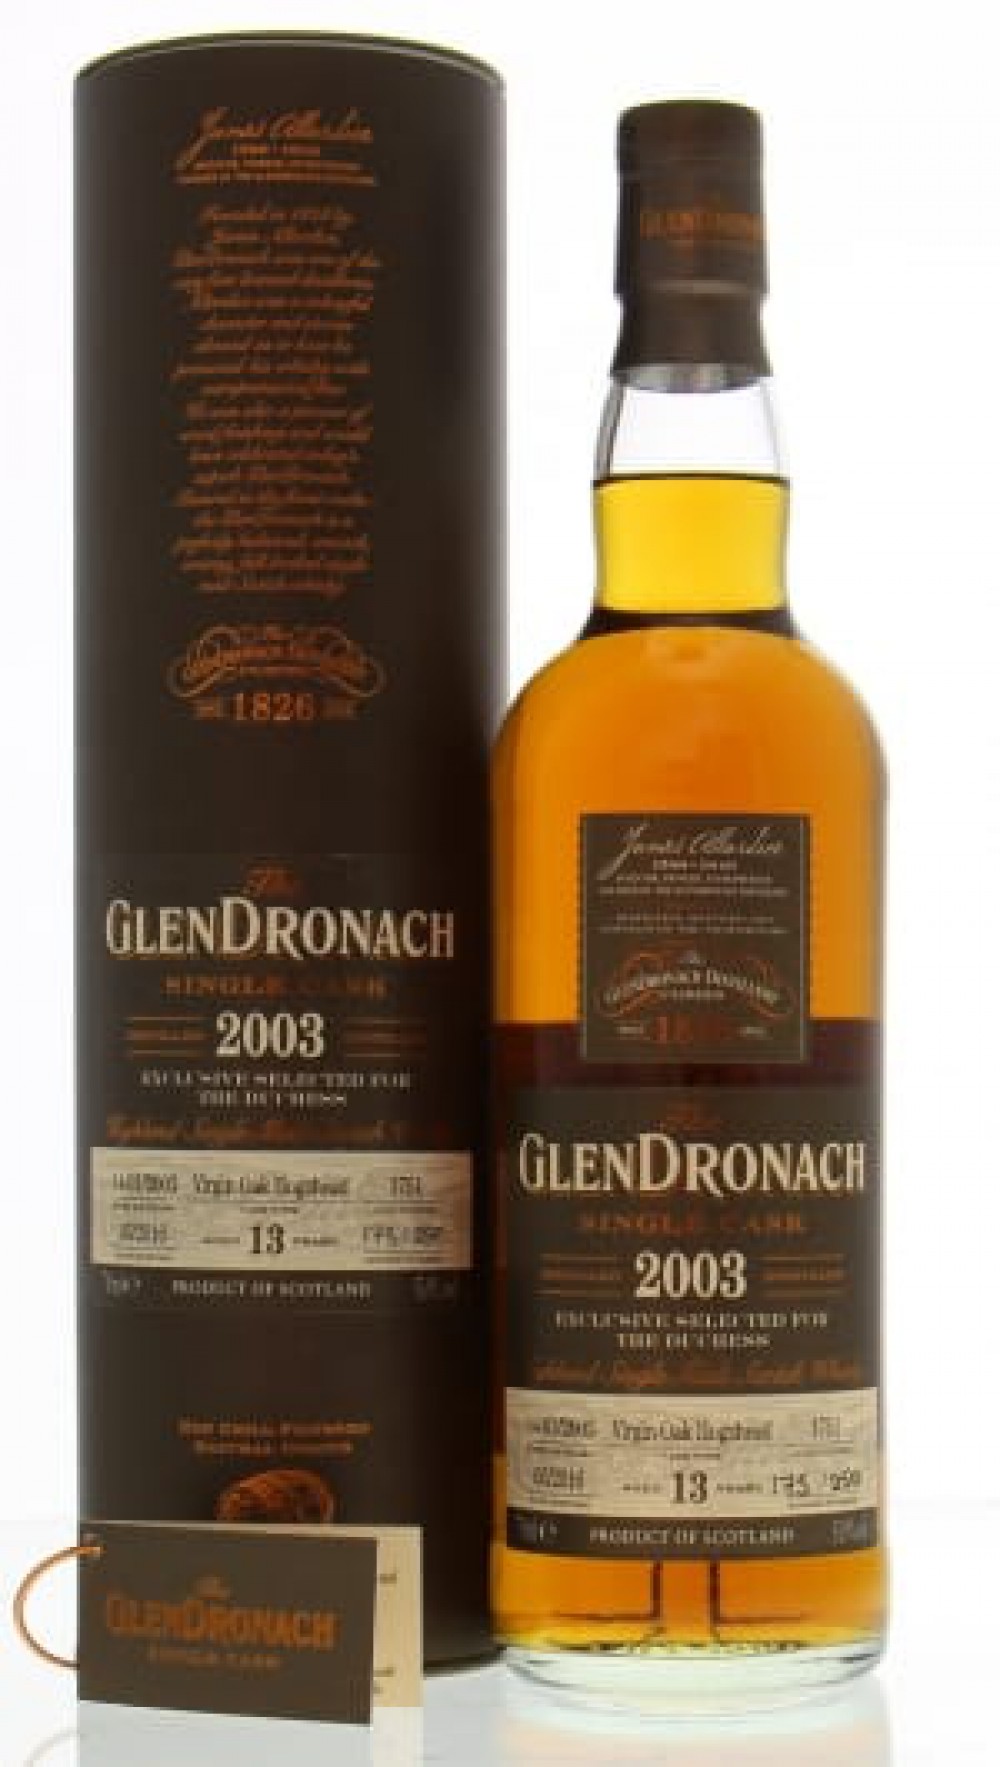 Glendronach Exclusively selected for the Duchess